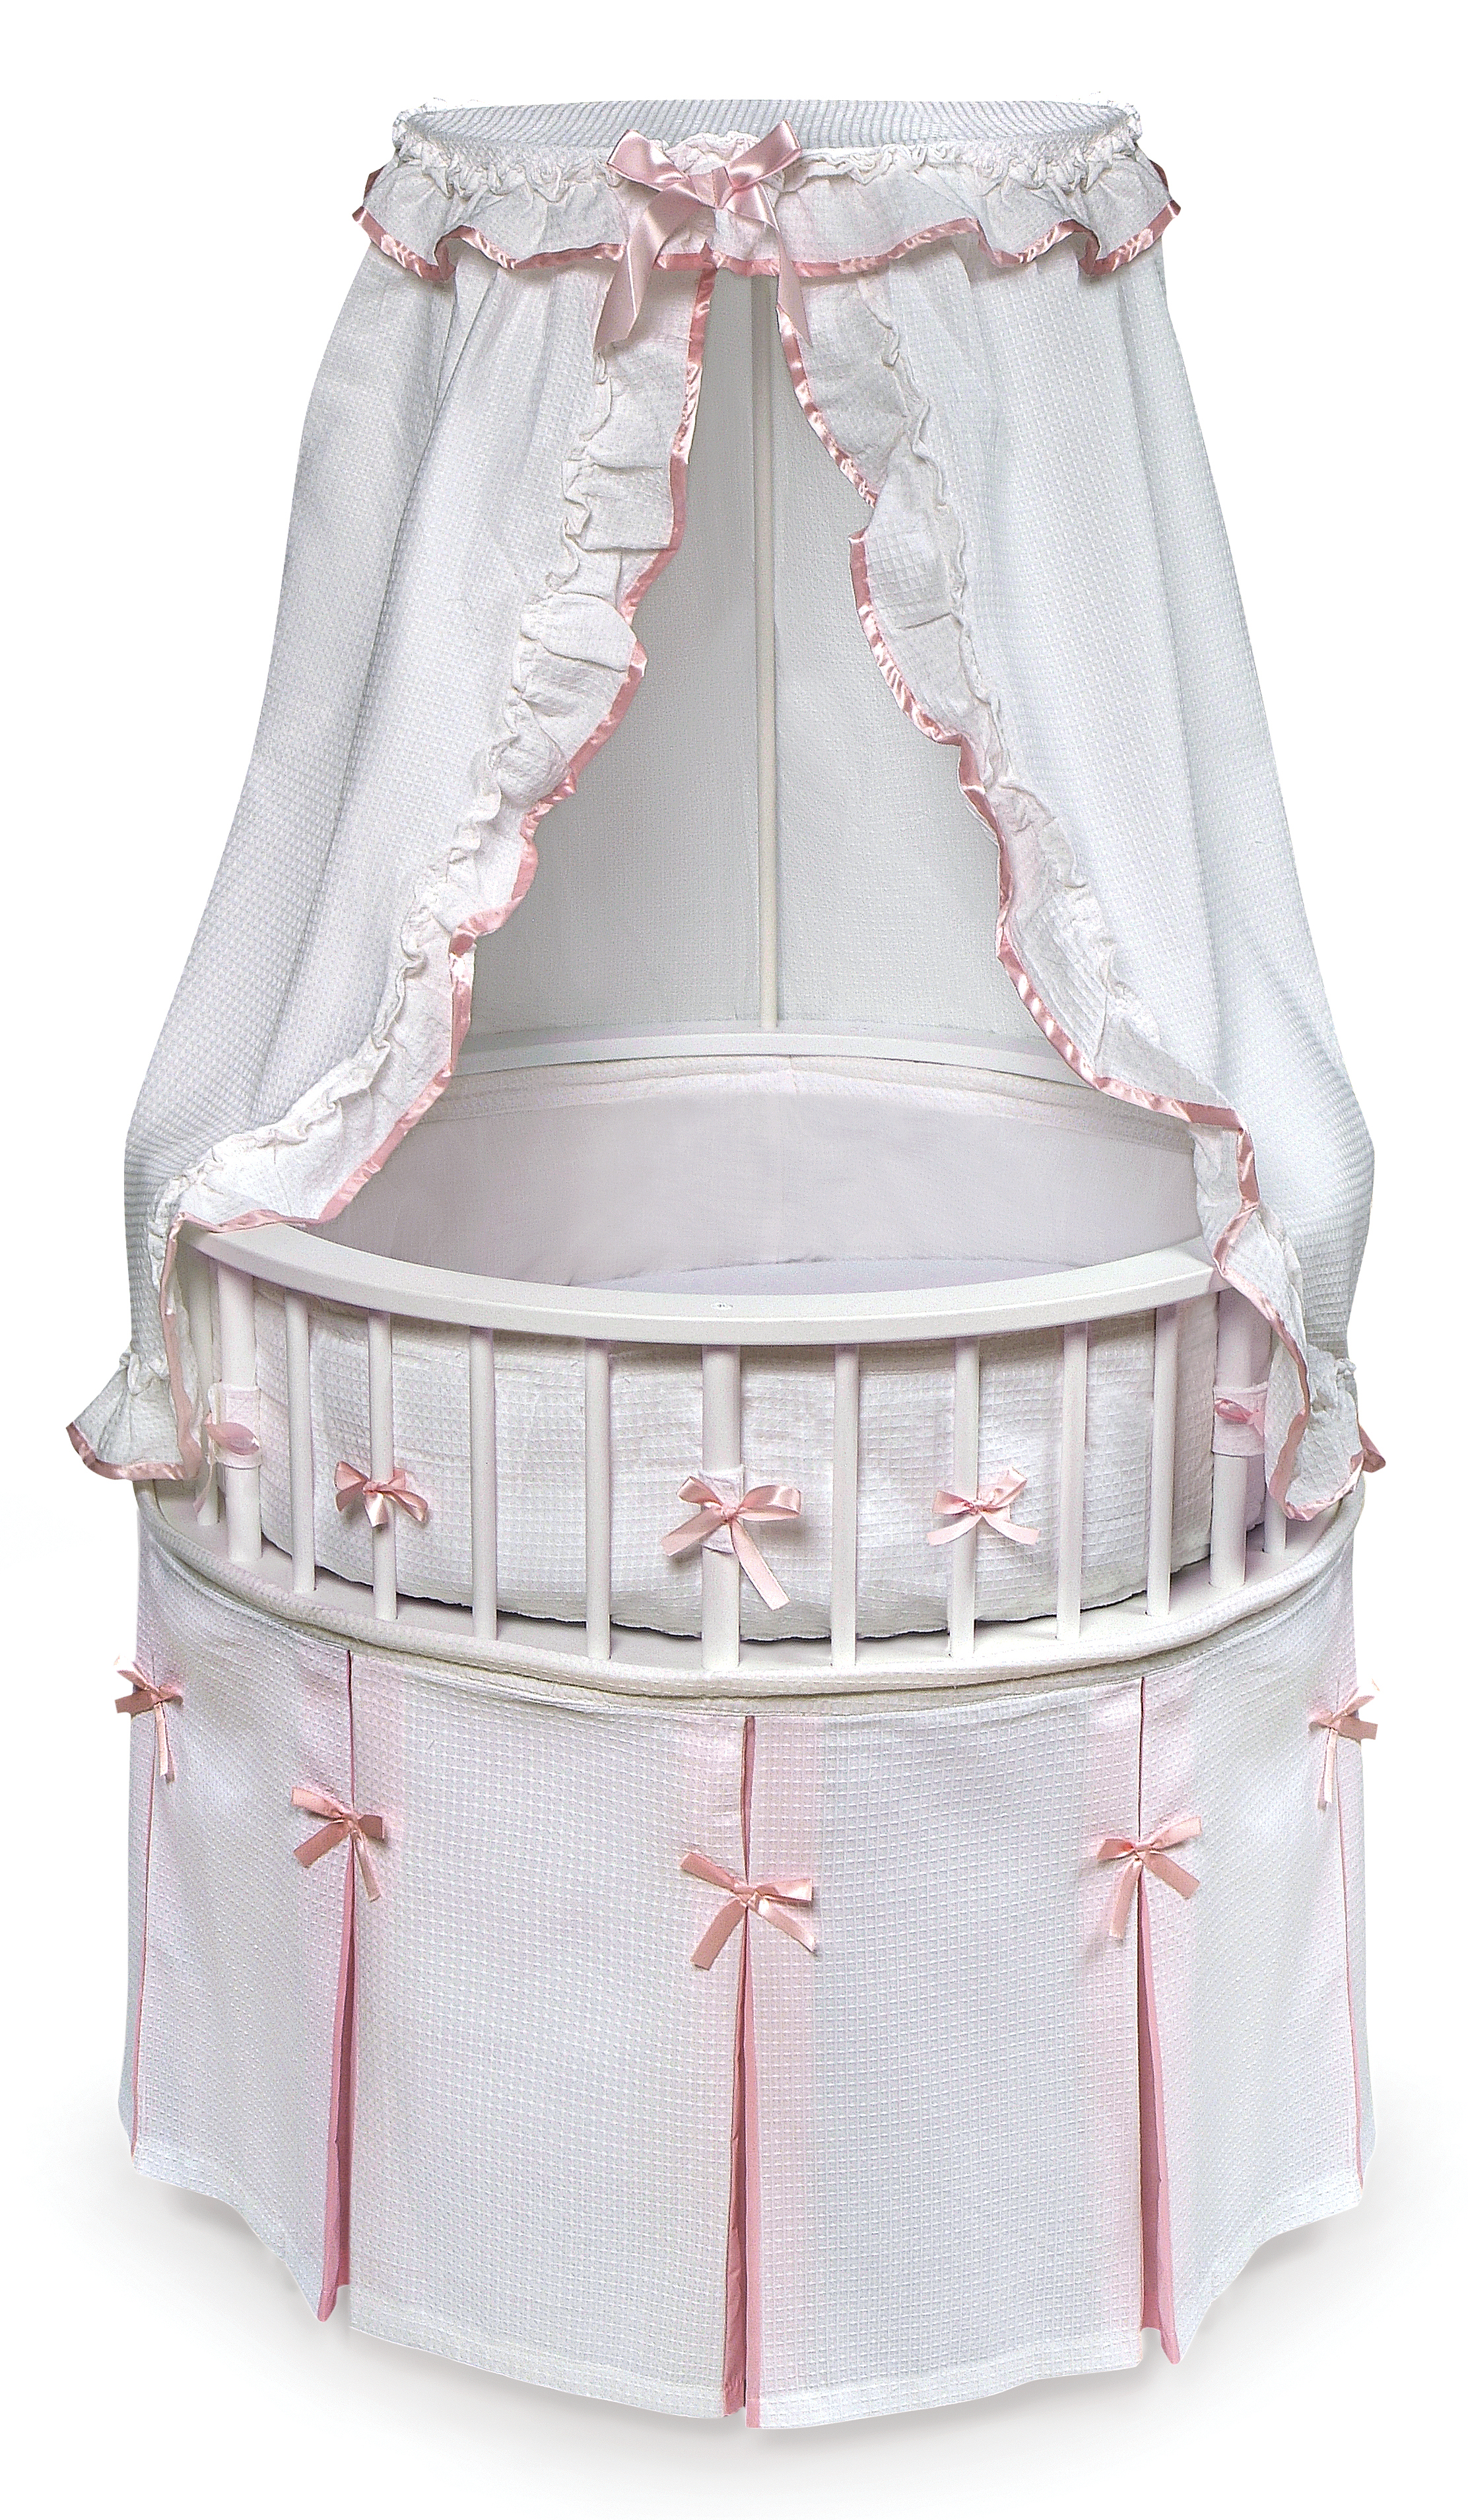 Elegance Round Baby Bassinet with Canopy - White/Pink